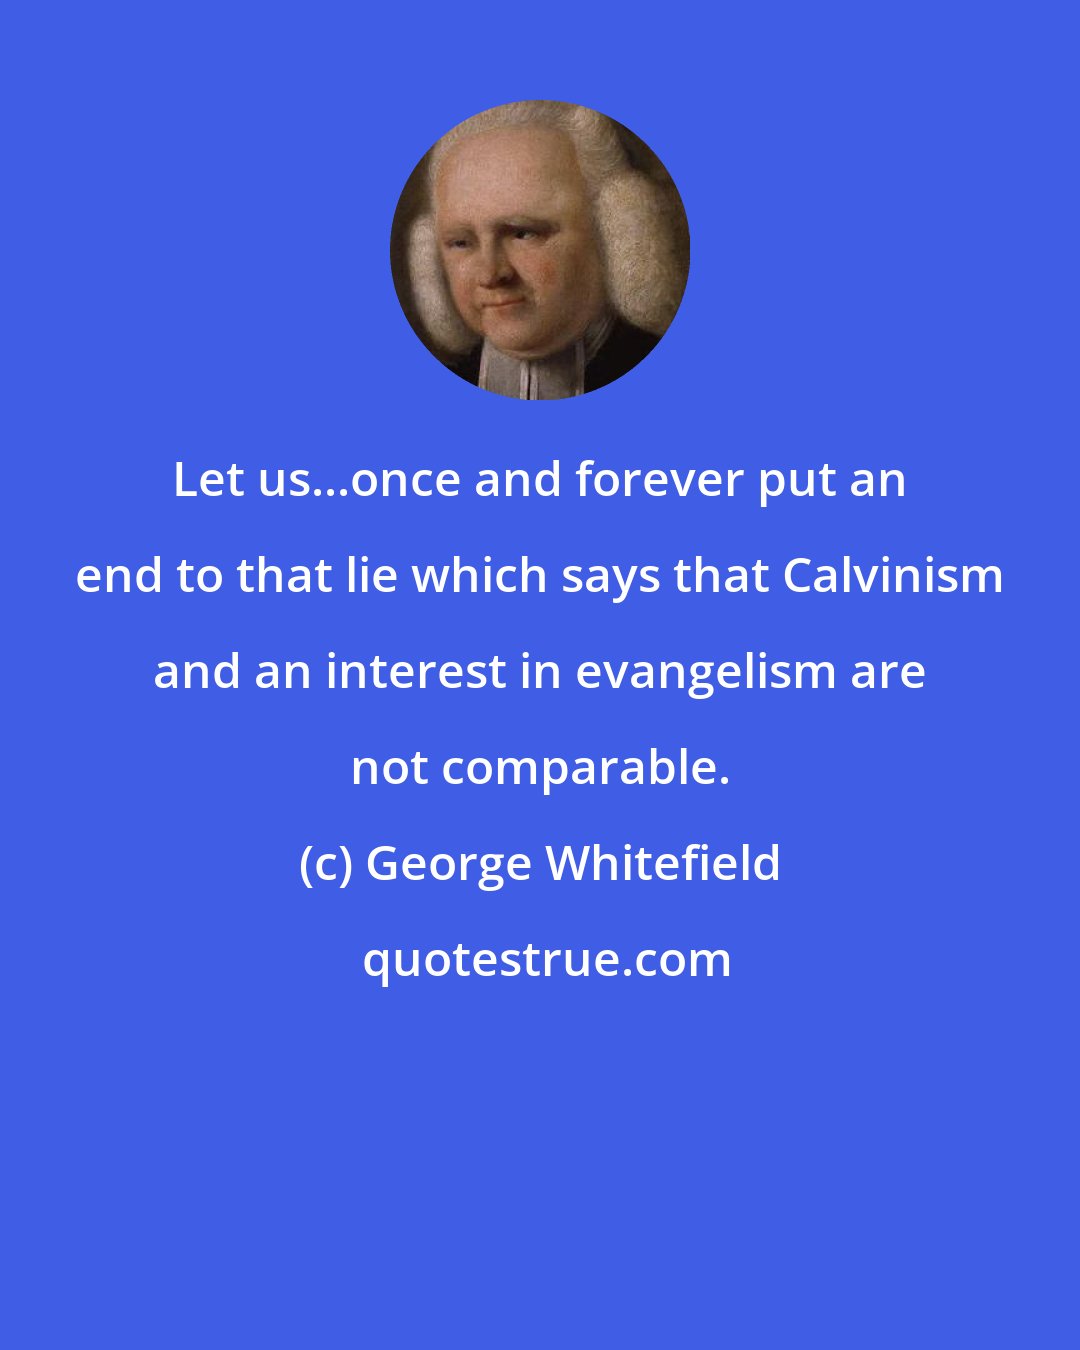 George Whitefield: Let us...once and forever put an end to that lie which says that Calvinism and an interest in evangelism are not comparable.